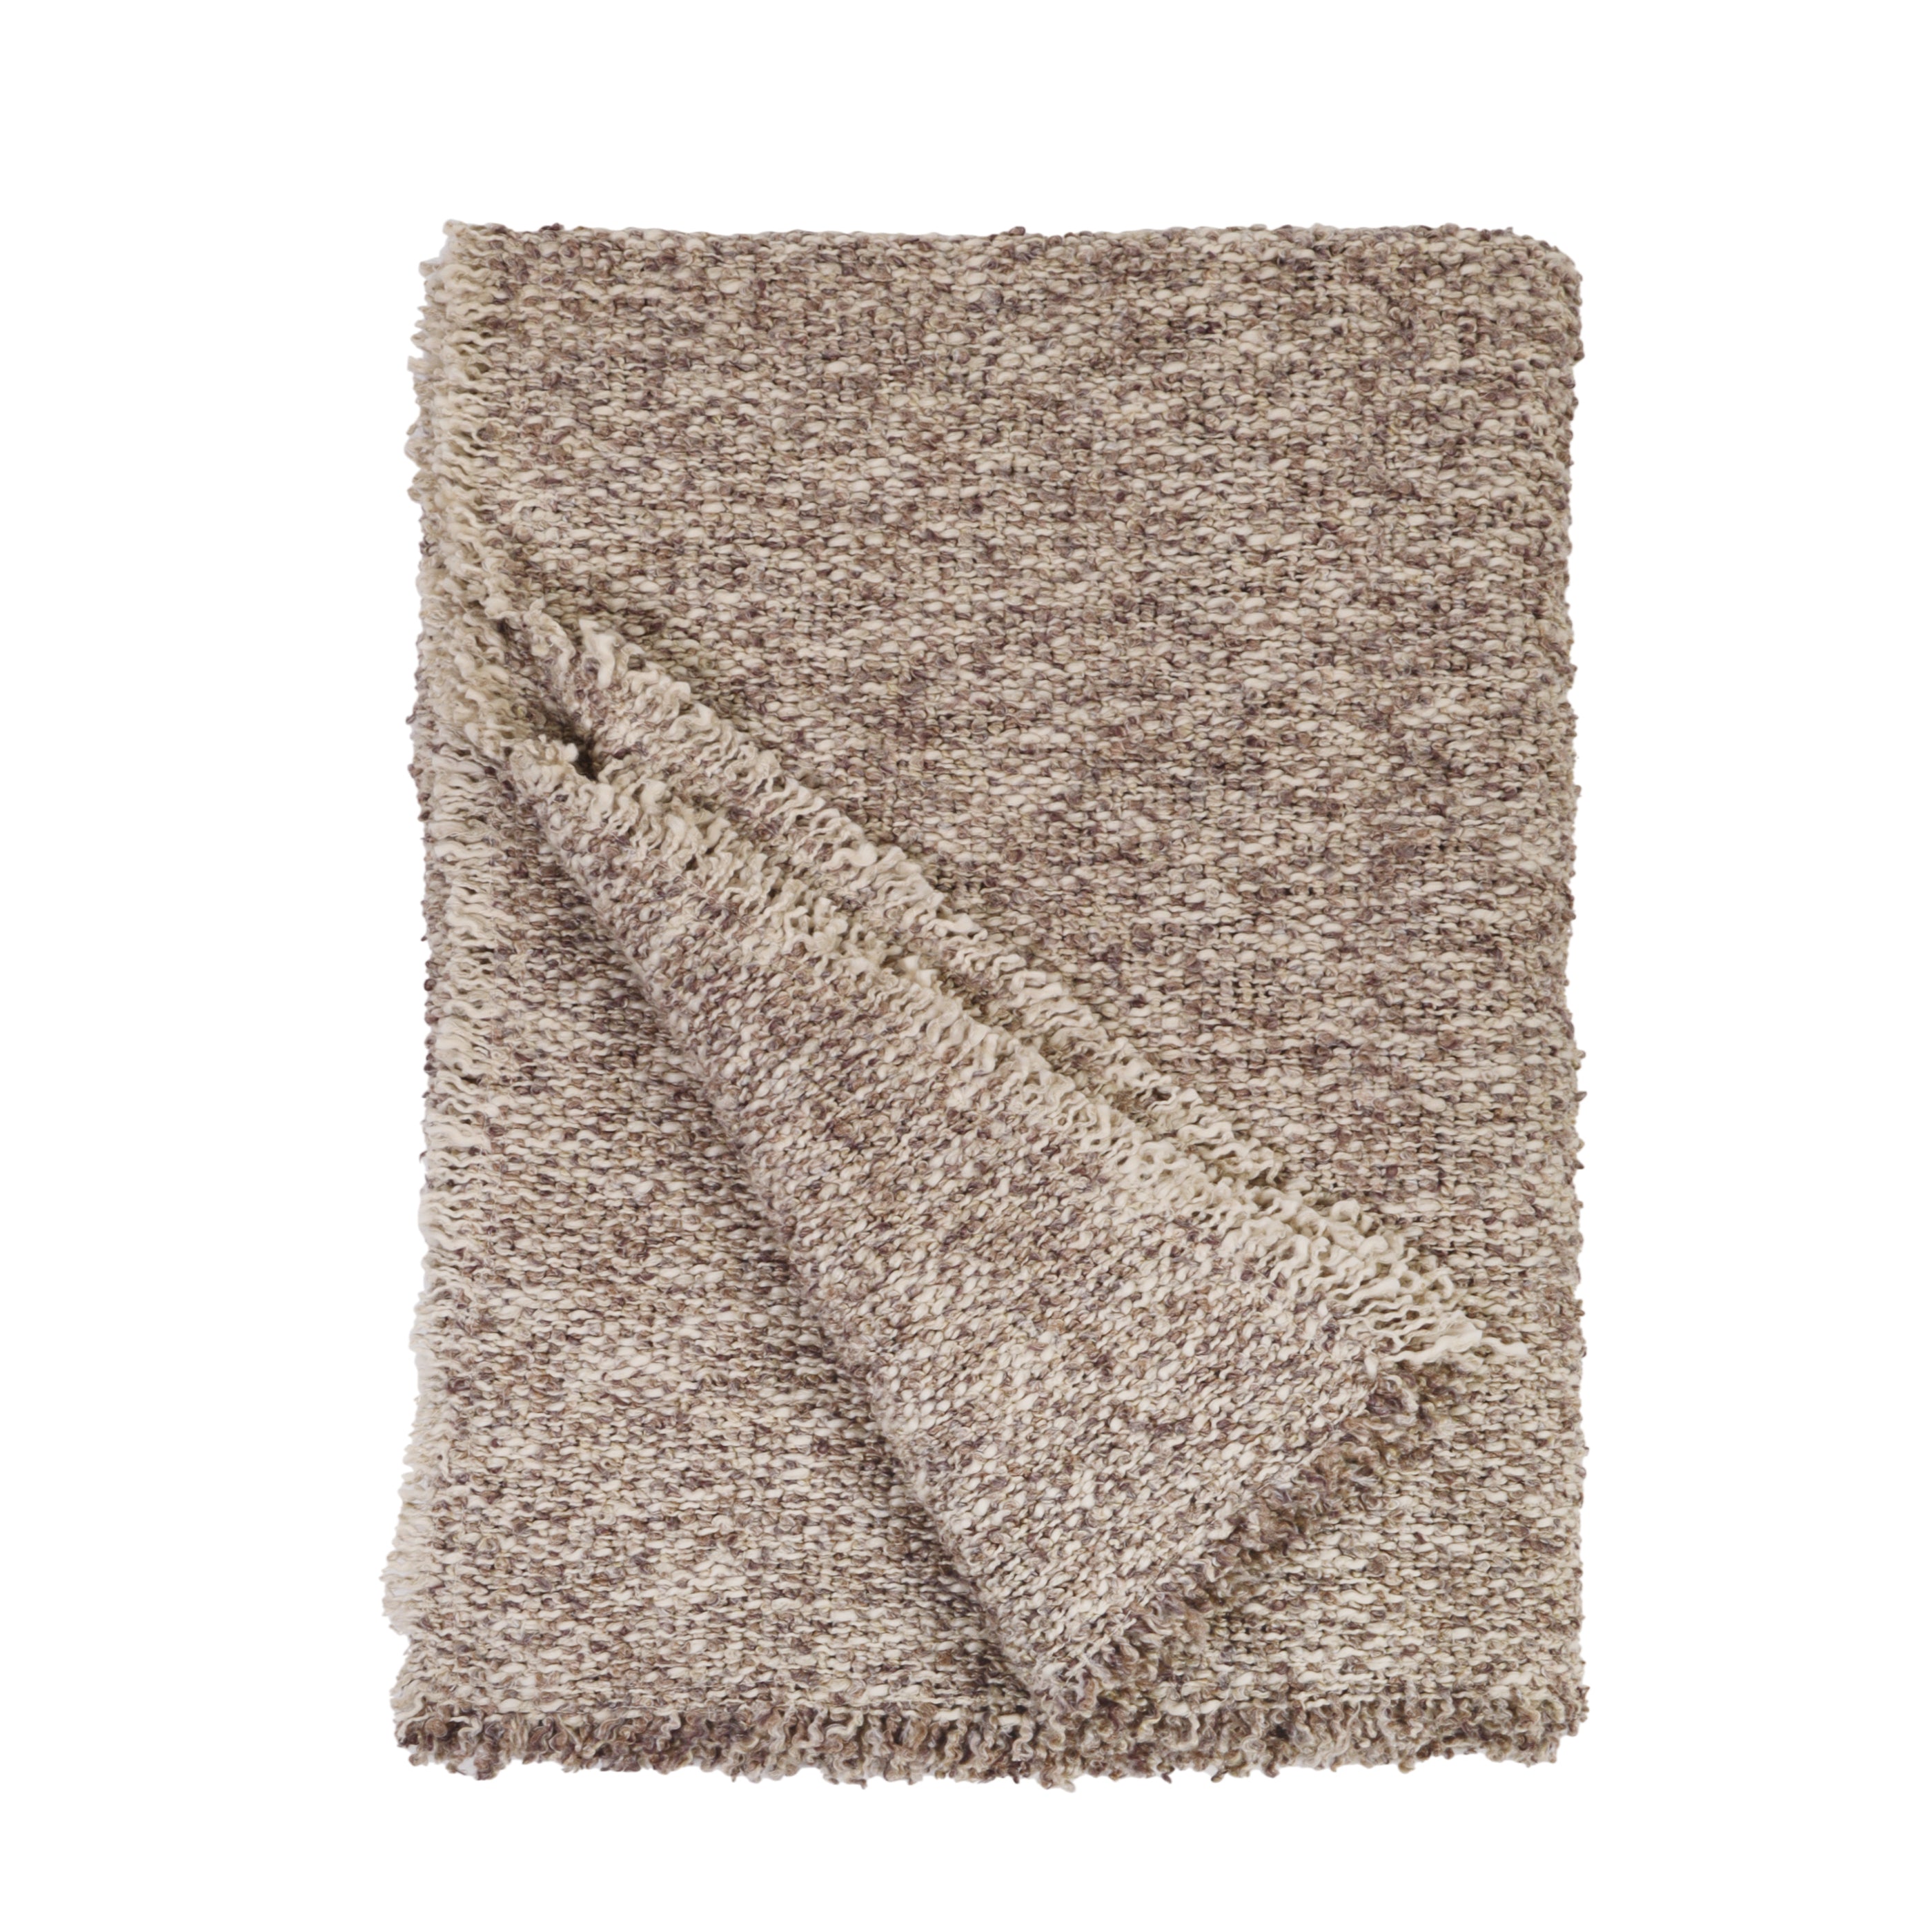 pompom at home - brentwood - throw - pebble color